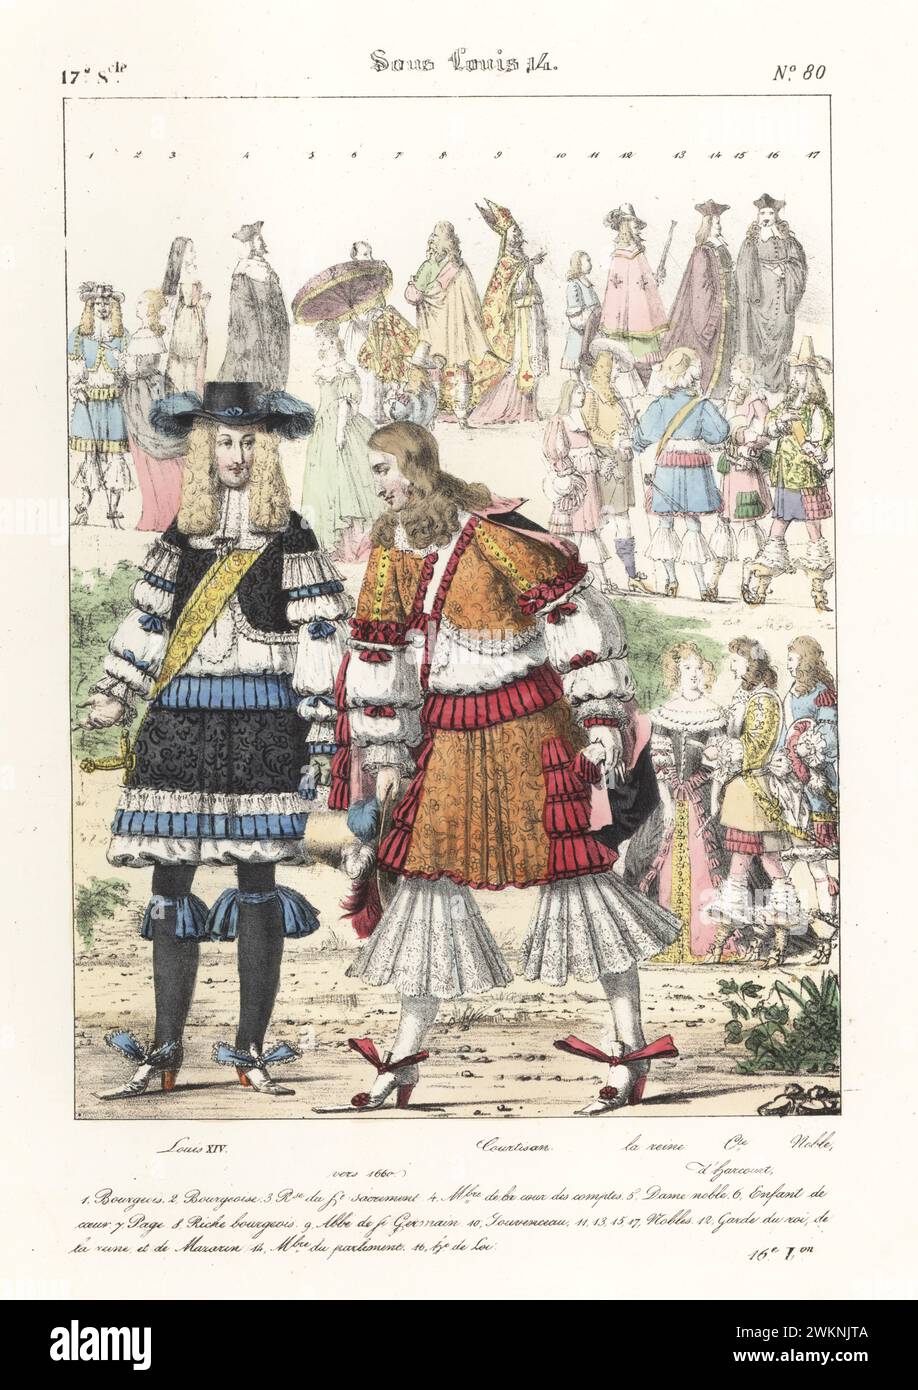 King Louis XIV with courtier, mid-17th century. The Sun King in embroidered waistcoat and pantalons, with frilled sleeves and breeches, garders, hose, ribbon shoes, court sword. With Queen Maria Theresa of Spain and Henri, Count of Harcourt. Louis XIV, Courtisan, la Reine, Comte d'Harcourt, Noble. Sous Louis 14. Handcoloured lithograph by Godard after an illustration by Charles Auguste Herbé from his own Costumes Francais, Civils, Militaires et Religieux, French Costumes, Civil, Military and Religious, Maison Martinet, Paris, 1837. Stock Photo